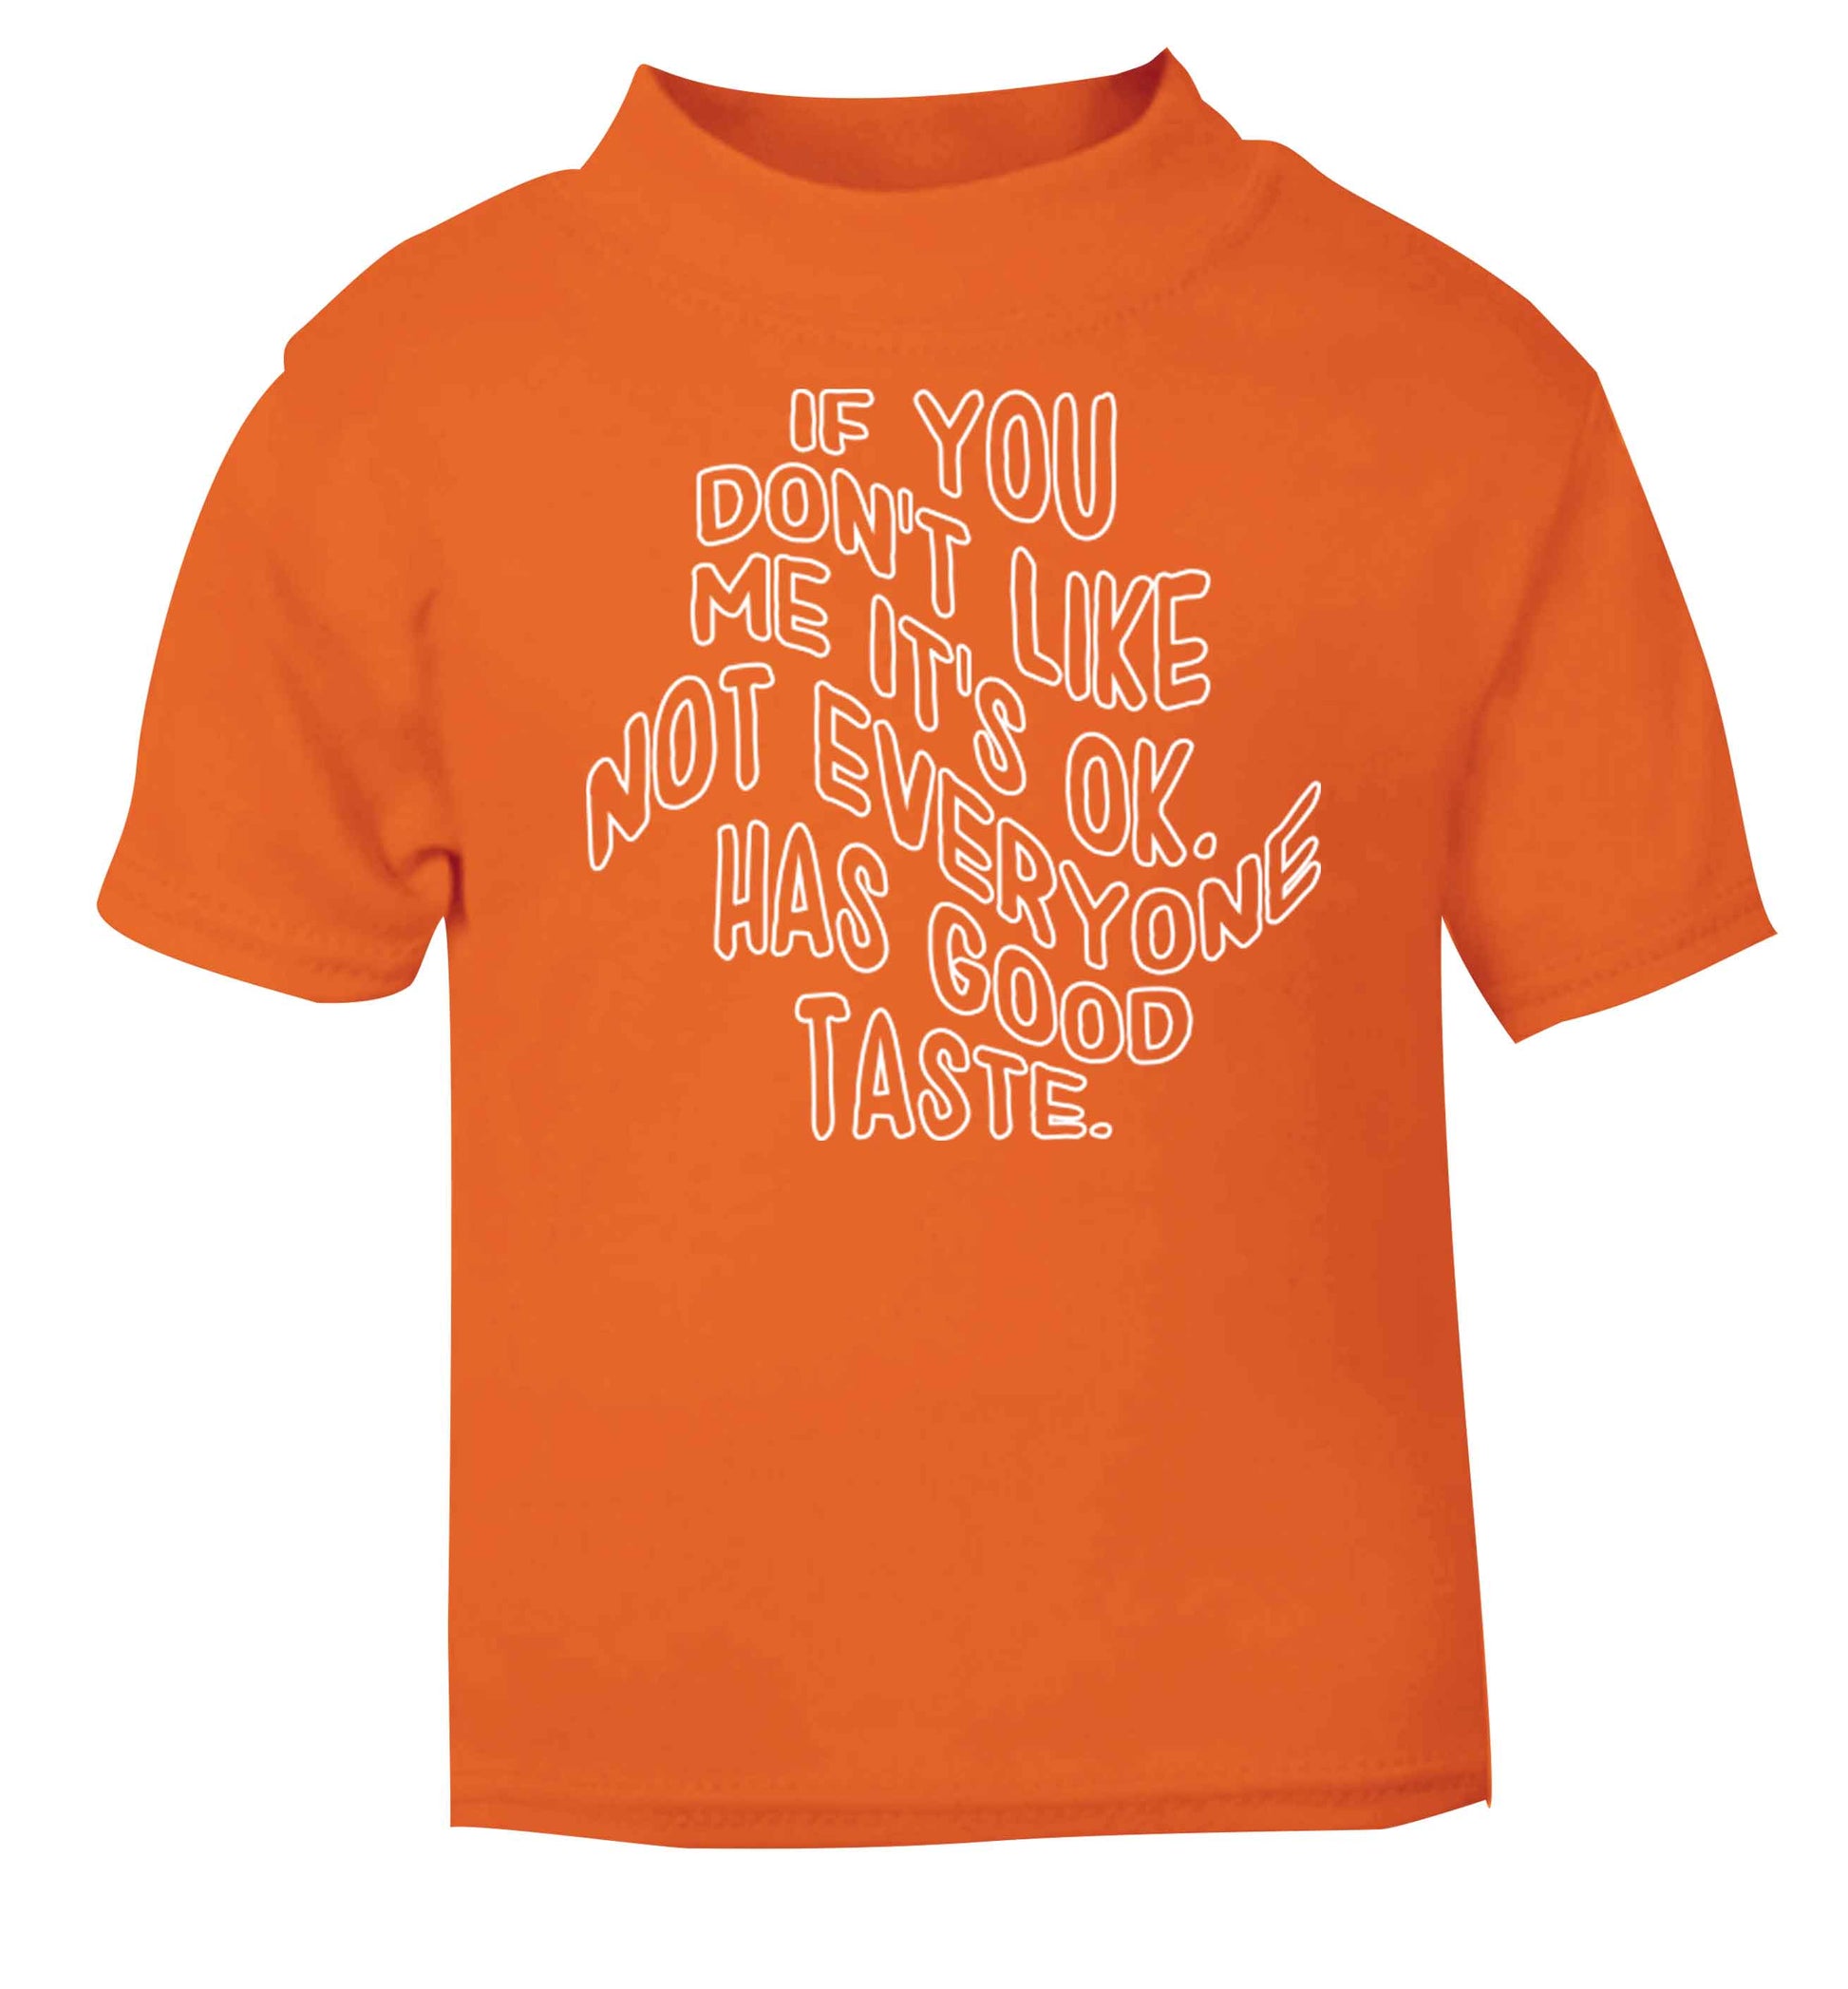 If you don't like me it's ok not everyone has good taste orange baby toddler Tshirt 2 Years